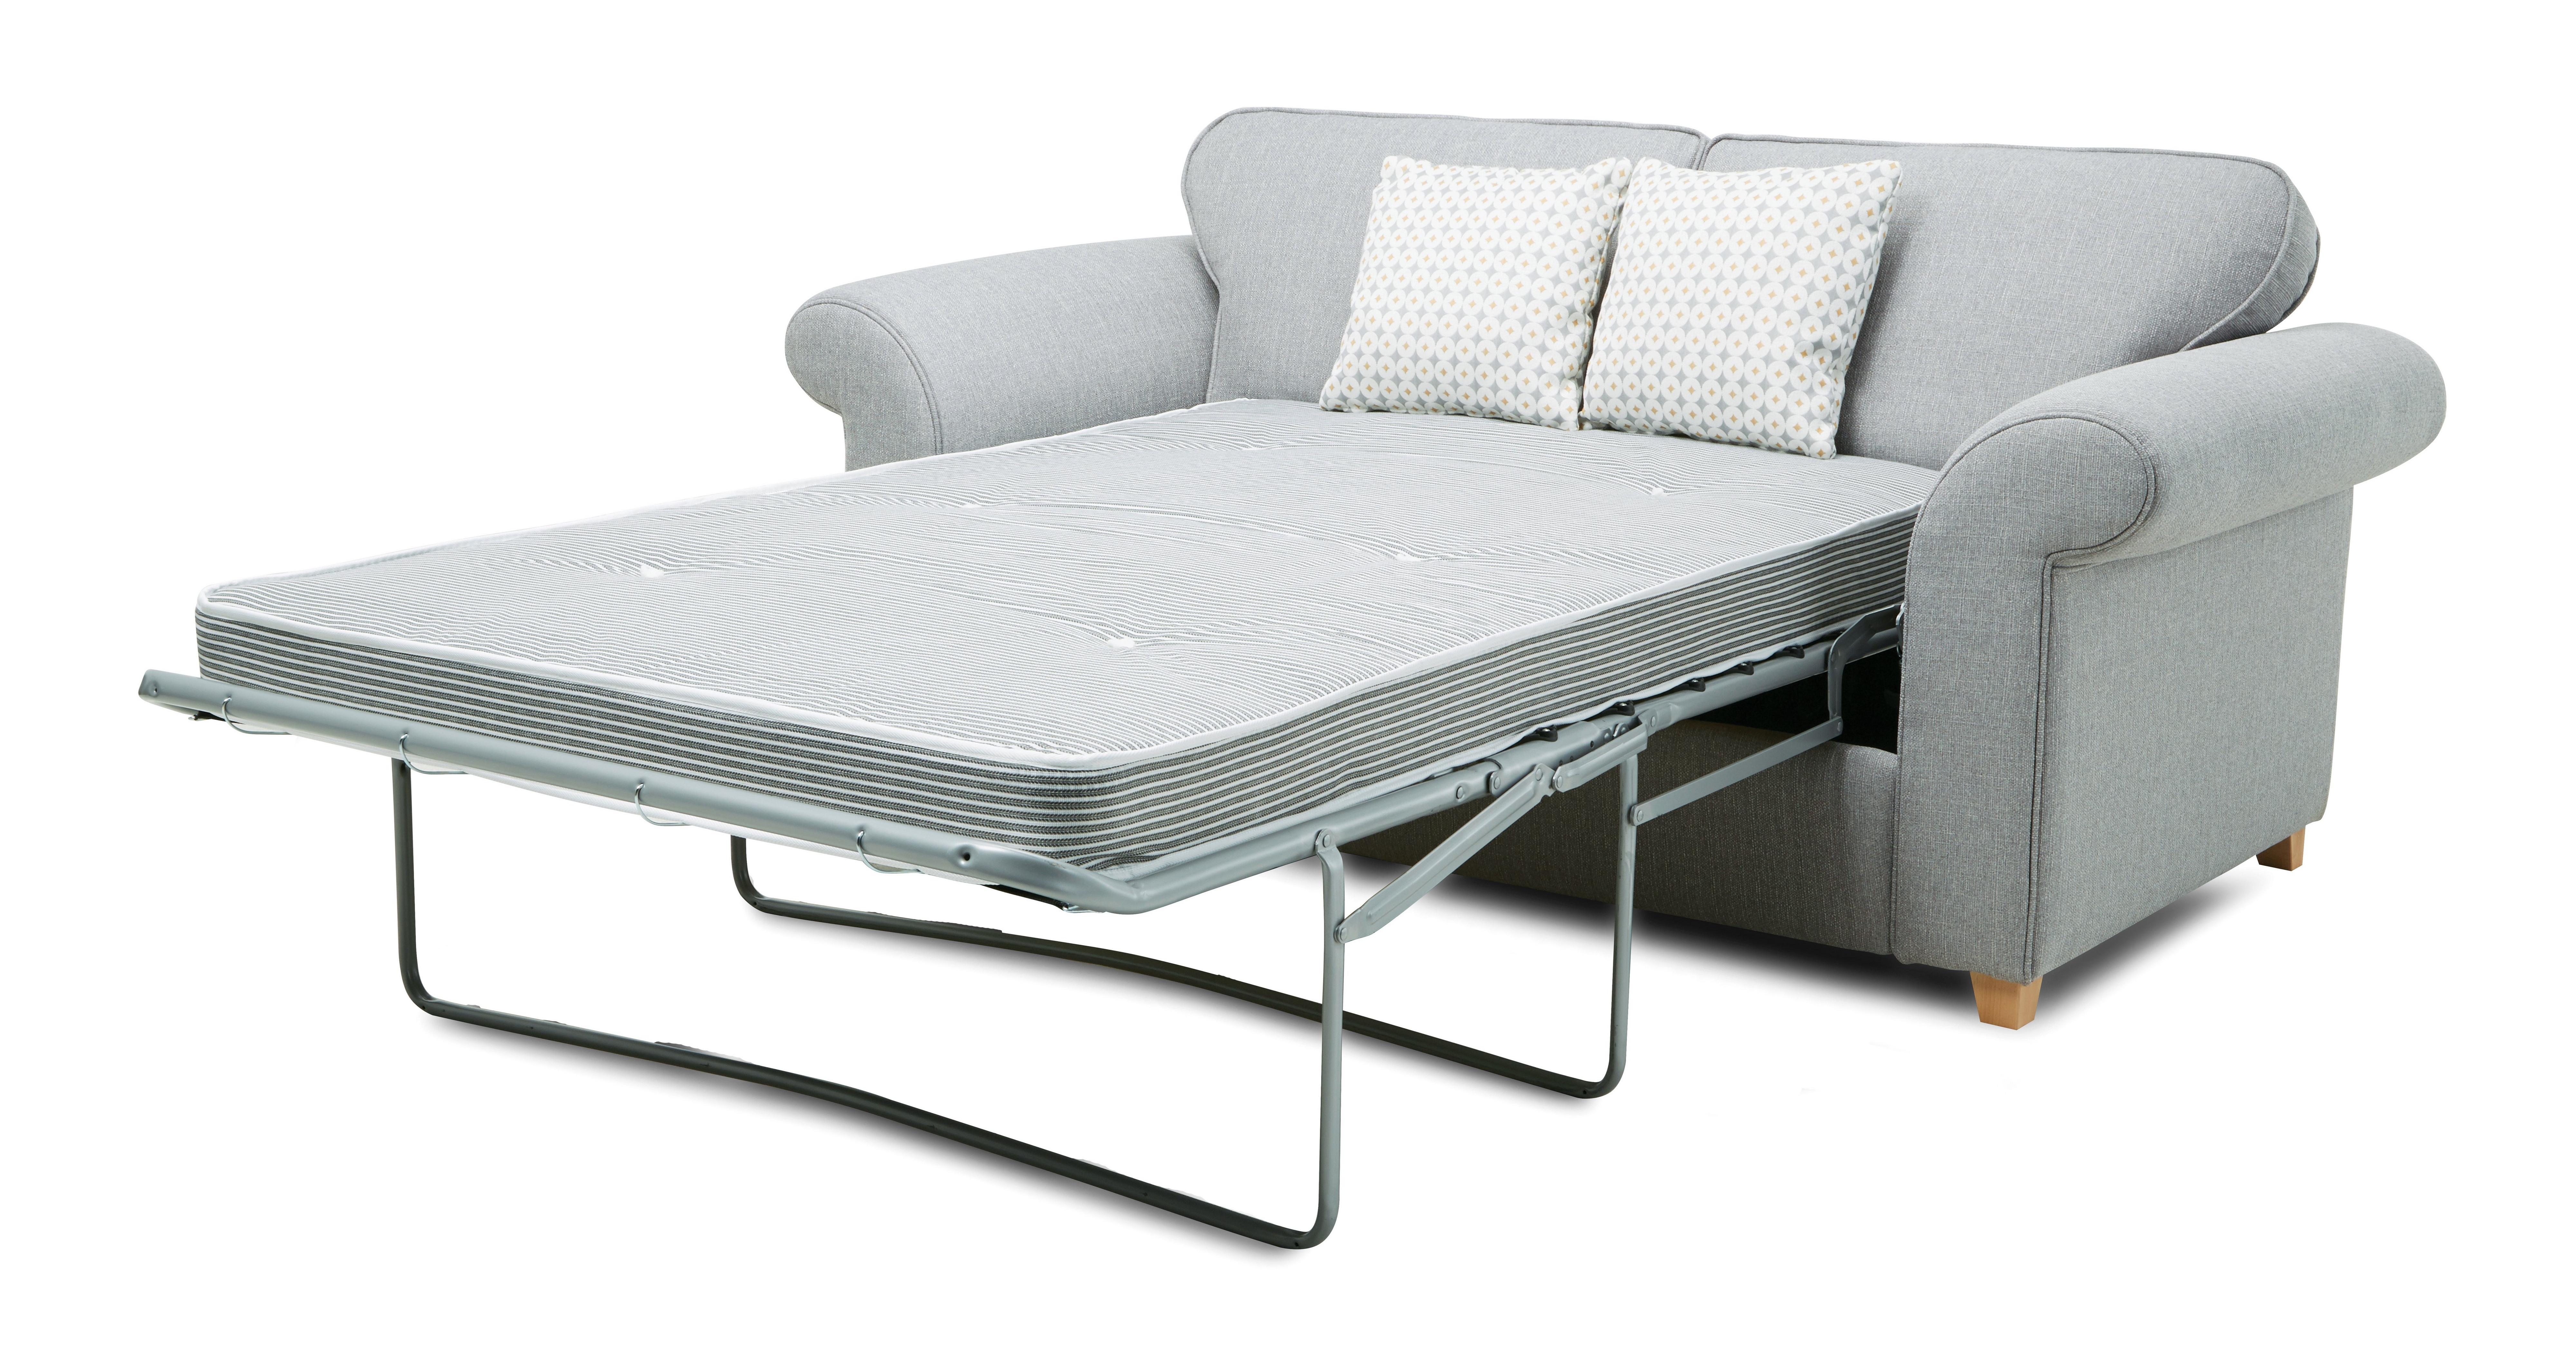 dfs angelic sofa bed review